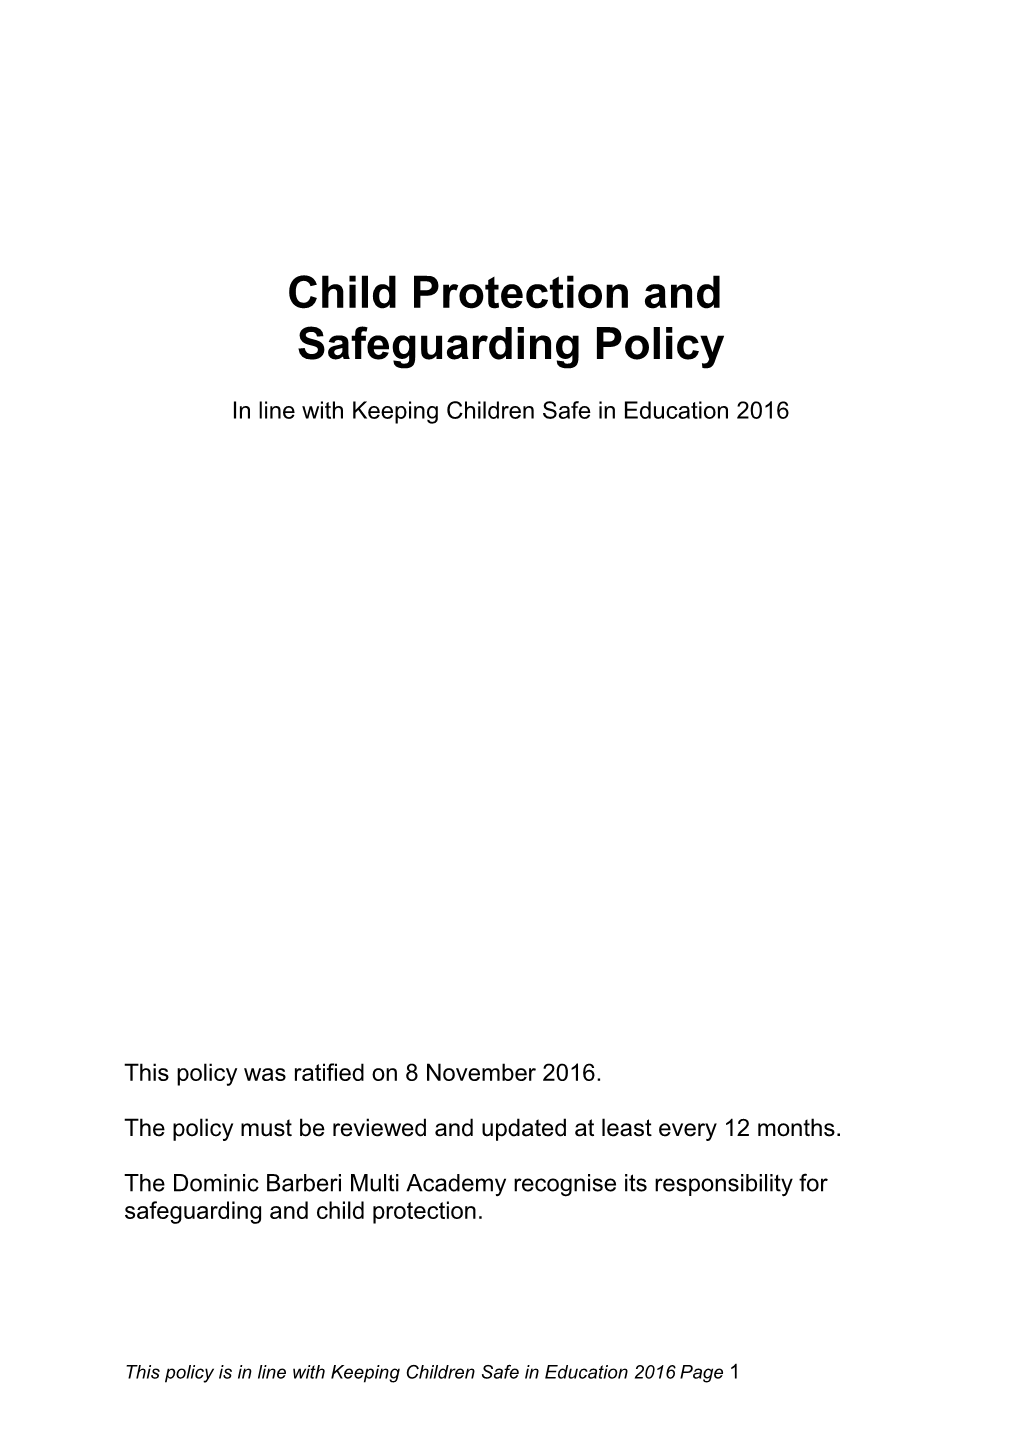 Child Protection and Safeguarding Policy